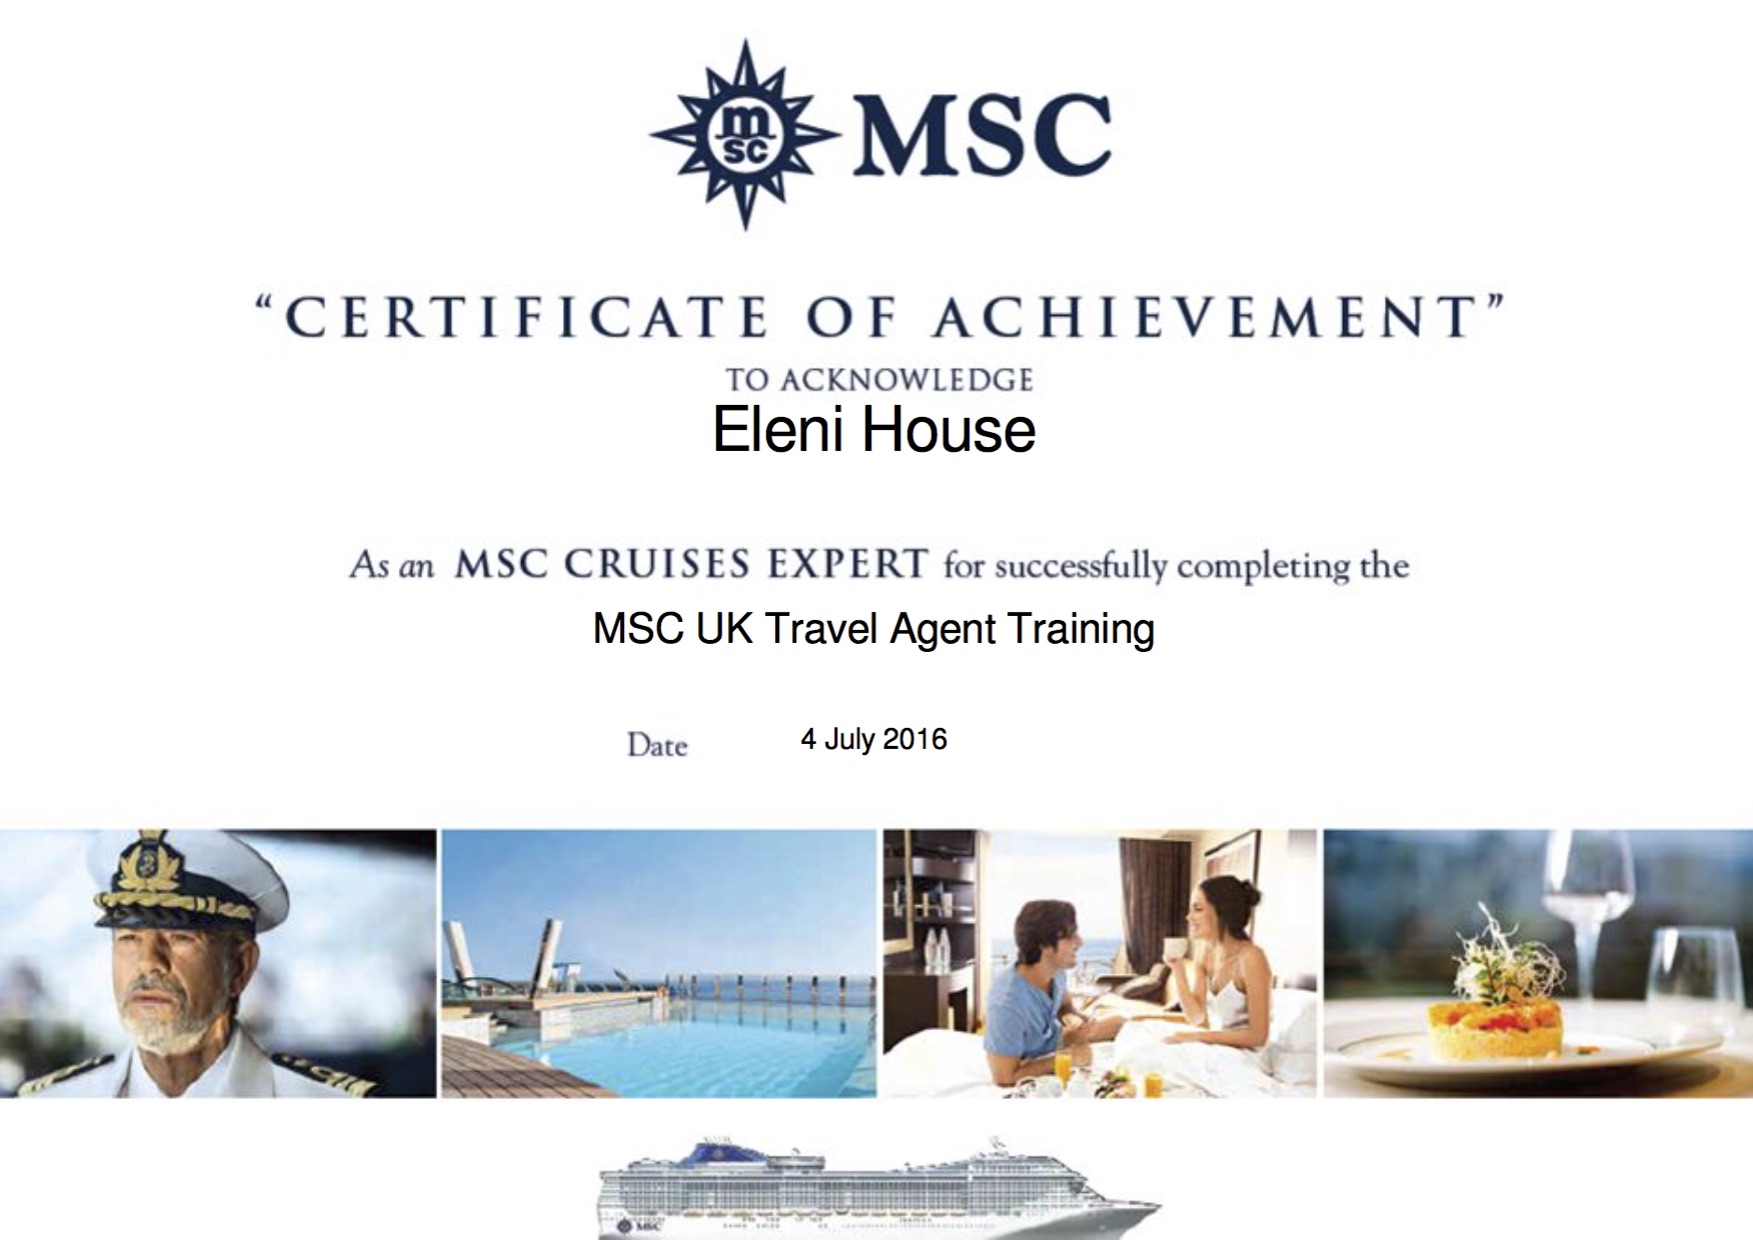 cruise ships qualifications